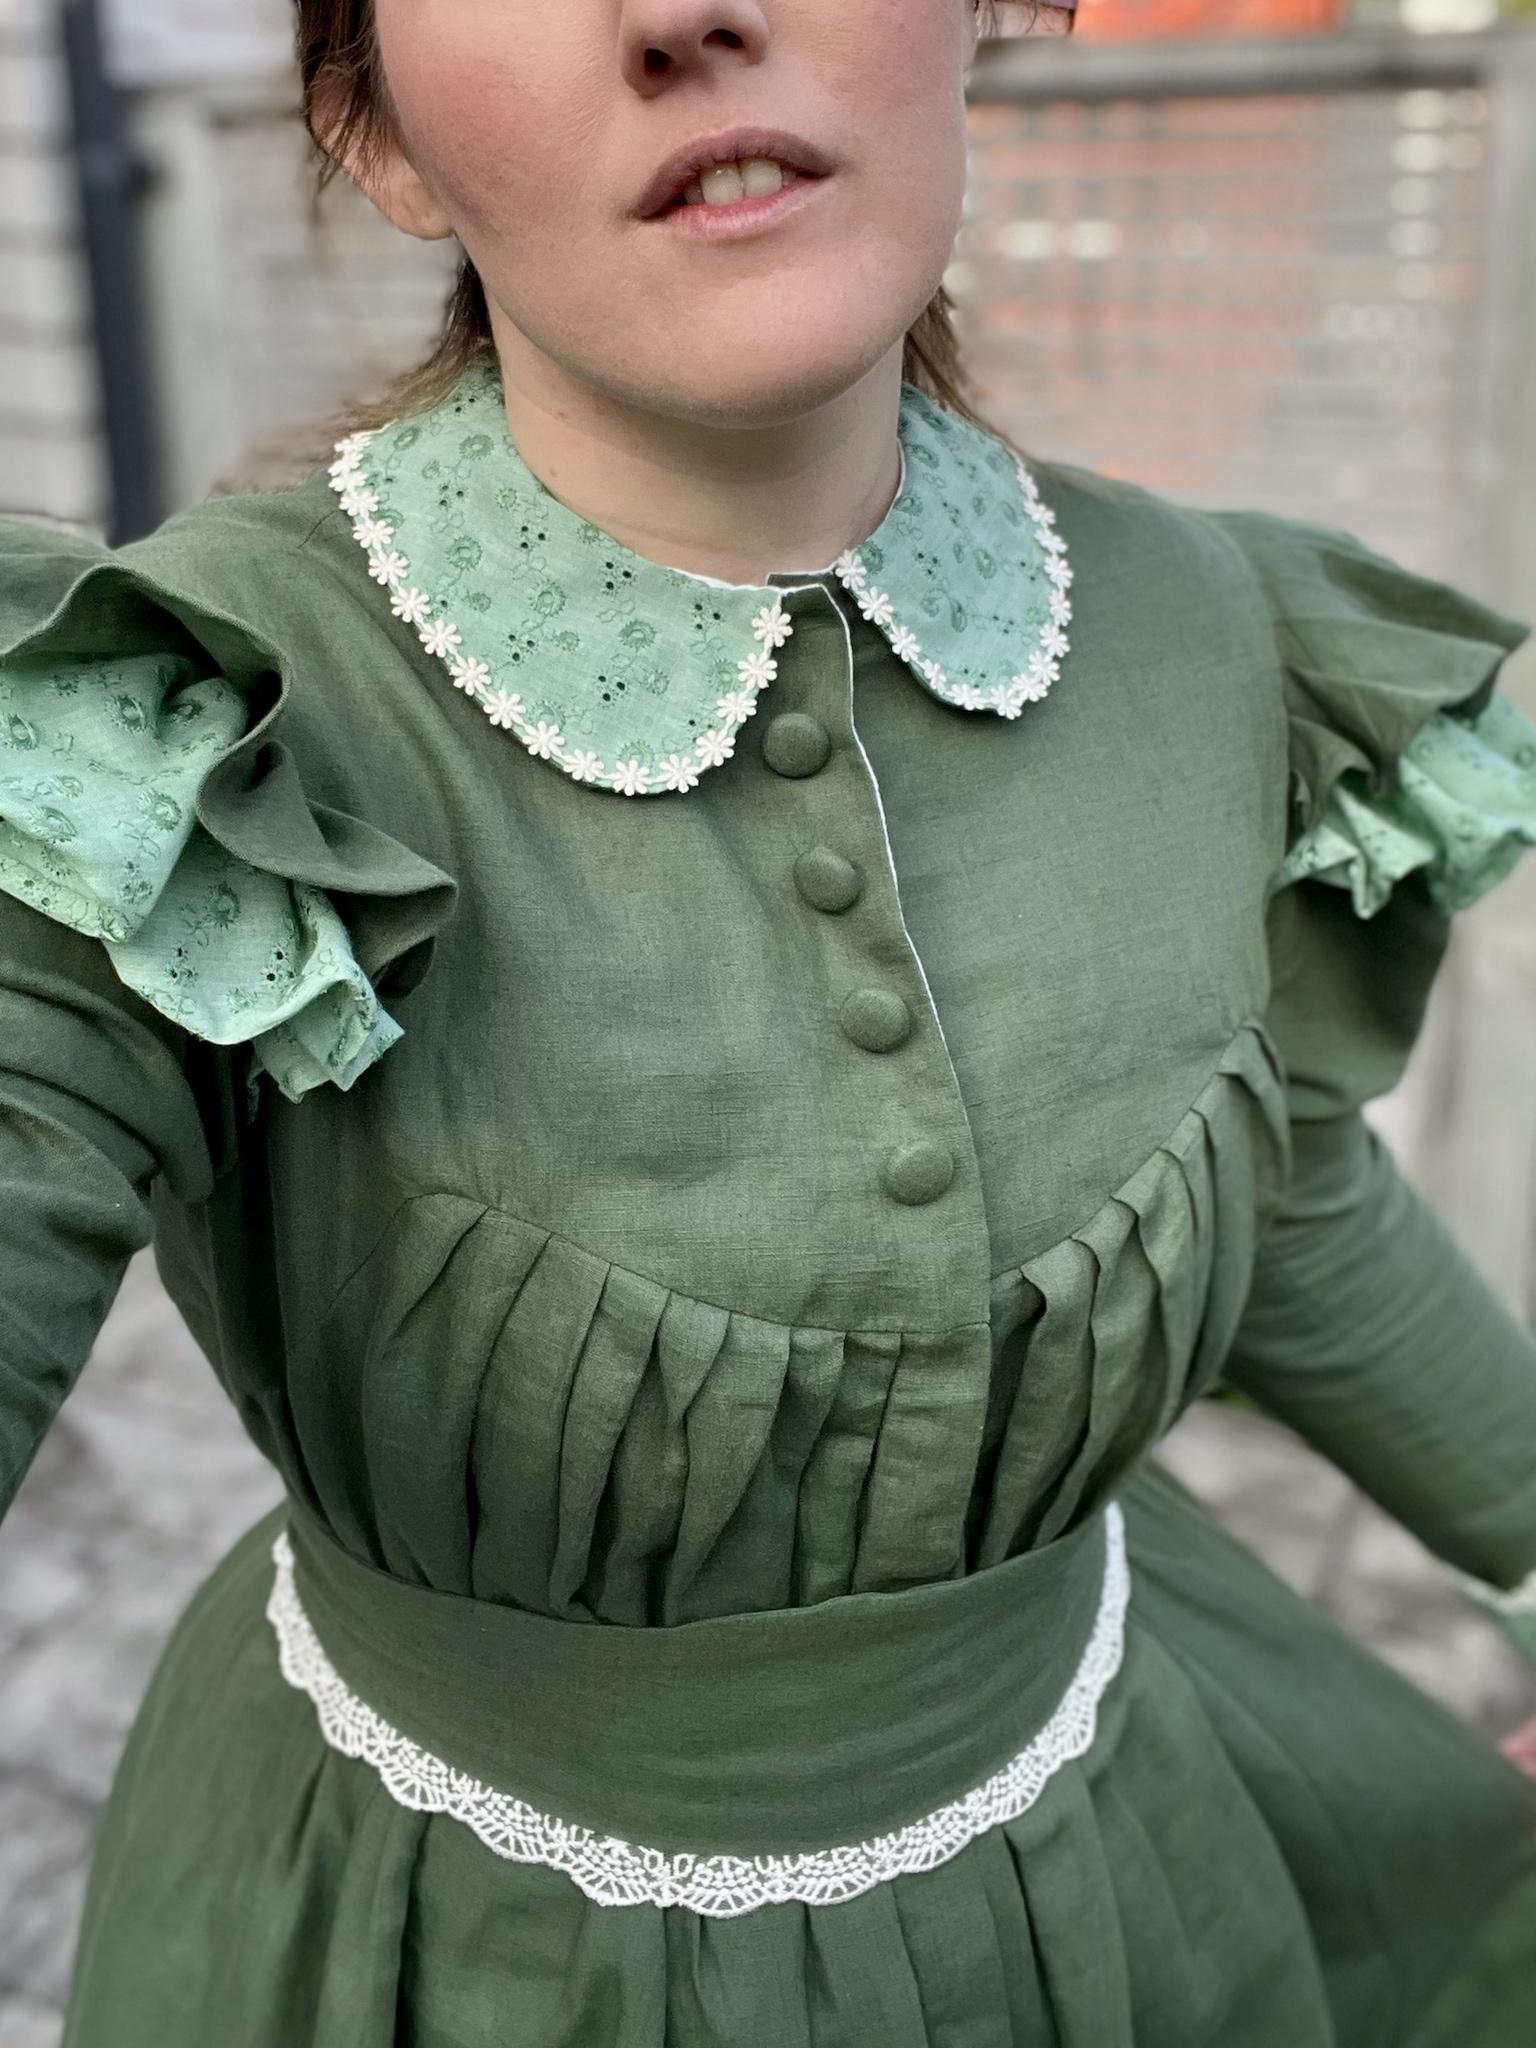 First sewing mission of the year performed! Made this for a Sophie Hatter cosplay